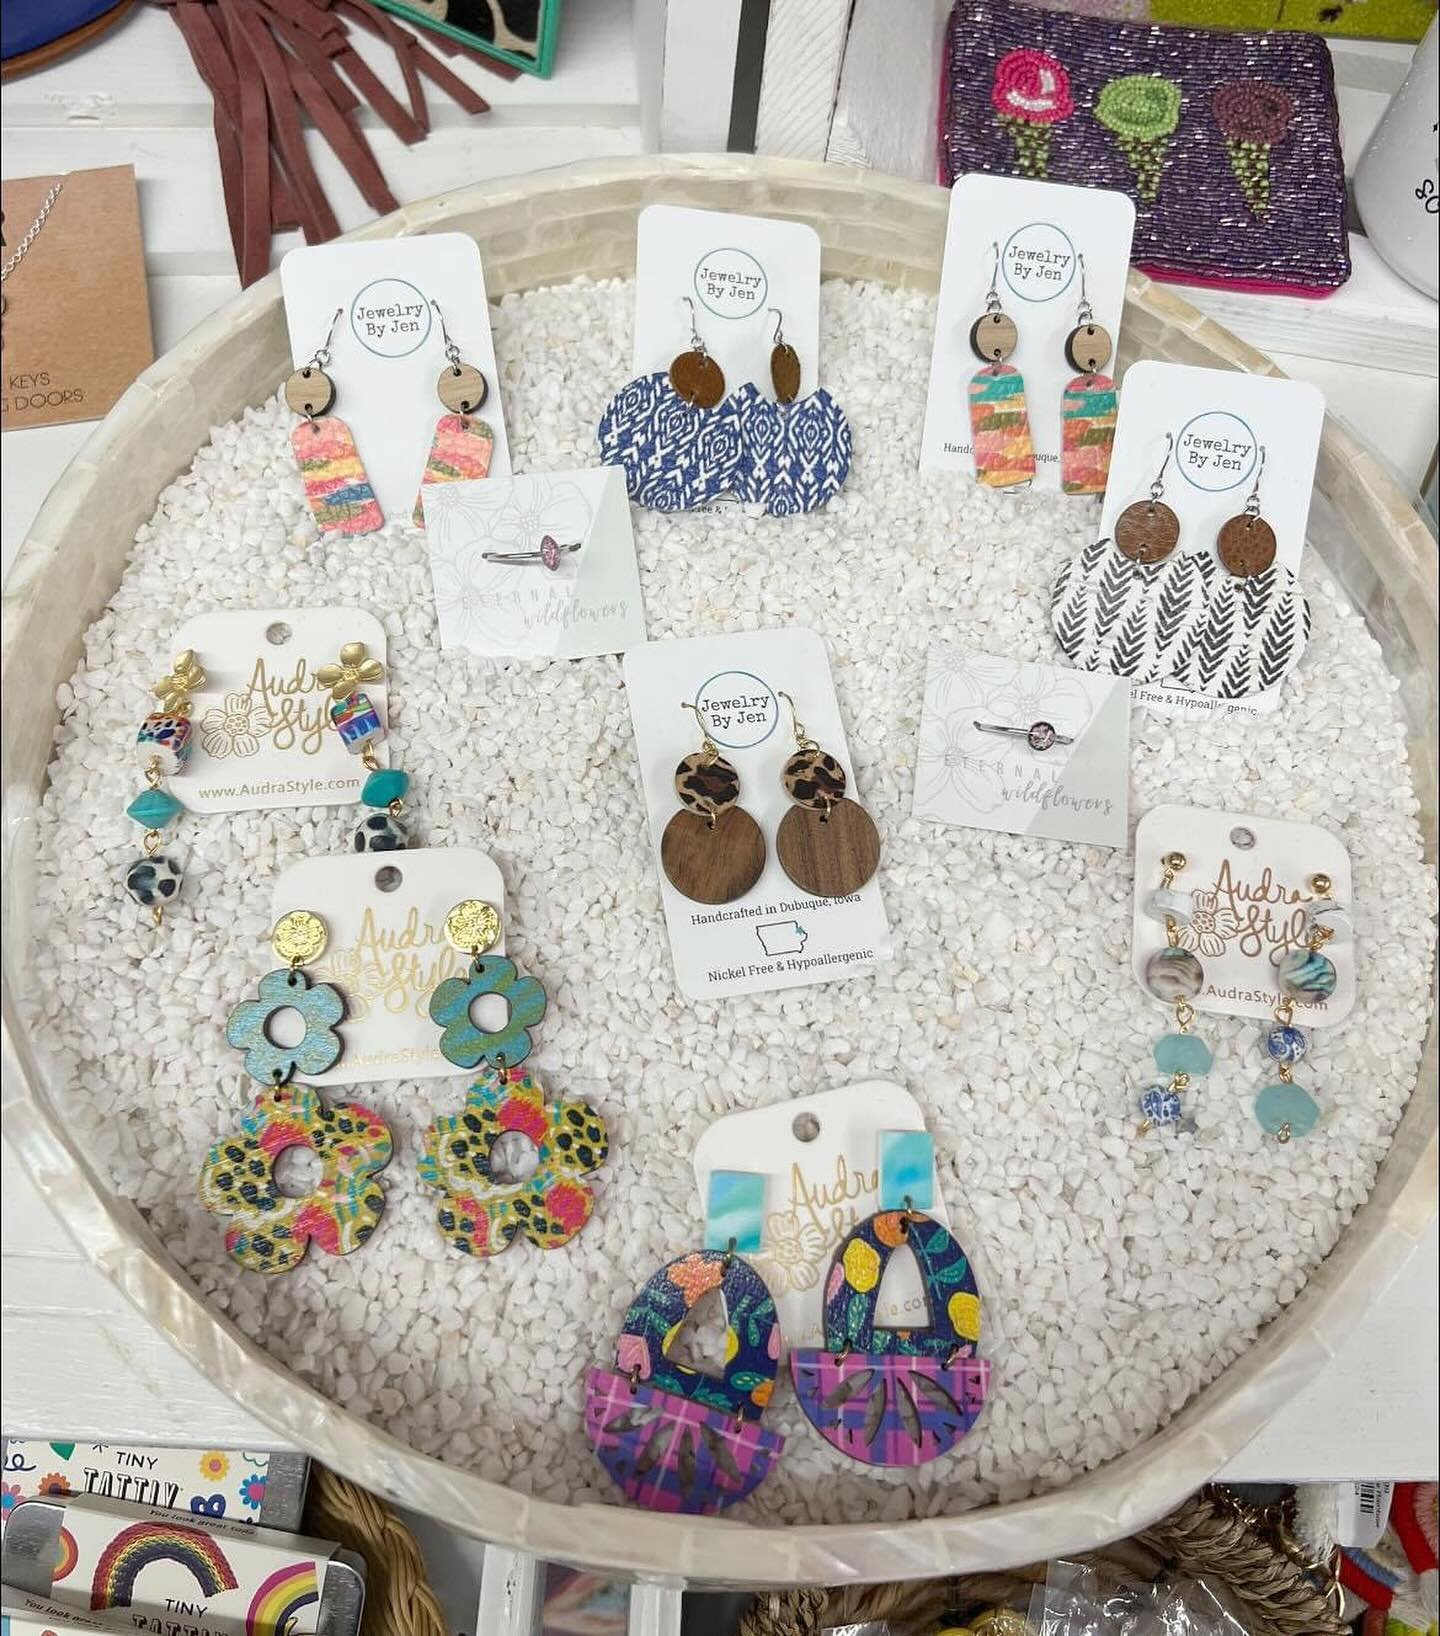 We have added a TON of new jewelry to our Sylva store in all price ranges! Lots of fun new items and we have several items from local NC &amp; SC artisans too! 

561 Mill Street, Sylva (look for the pink building)
Open Tuesday-Thursday 10-6, Fri &amp